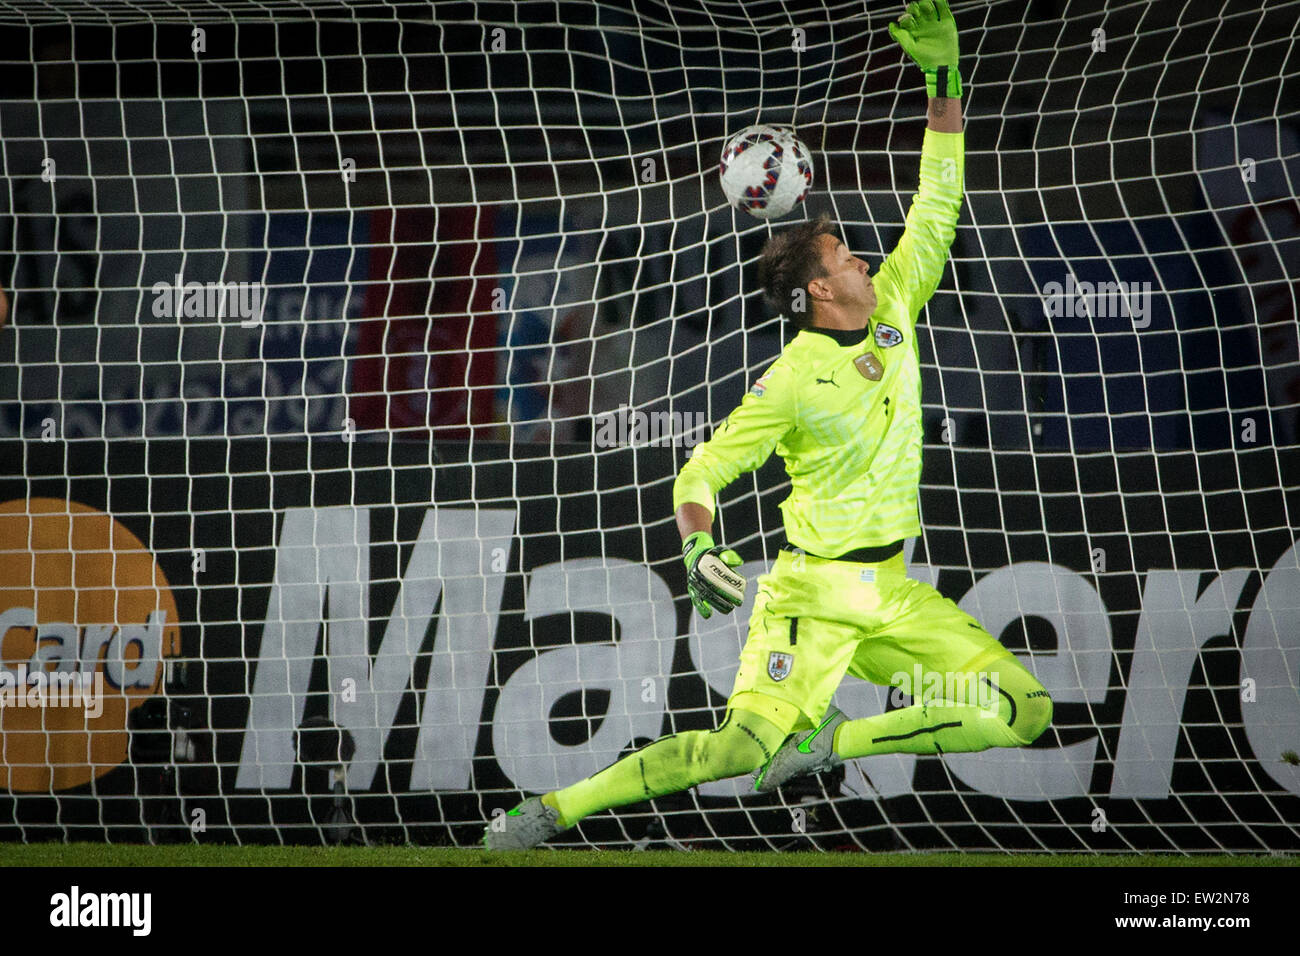 La Serena, Chile. 16th June, 2015. Goalie Fernando Muslera of Uruguay tries to prevent a goal during the Group B match against Argentina at the 2015 American Cup, at La Portada stadium, in La Serena, Chile, on June 16, 2015. Uruguay lost 0-1. Credit:  Pedro Mera/Xinhua/Alamy Live News Stock Photo